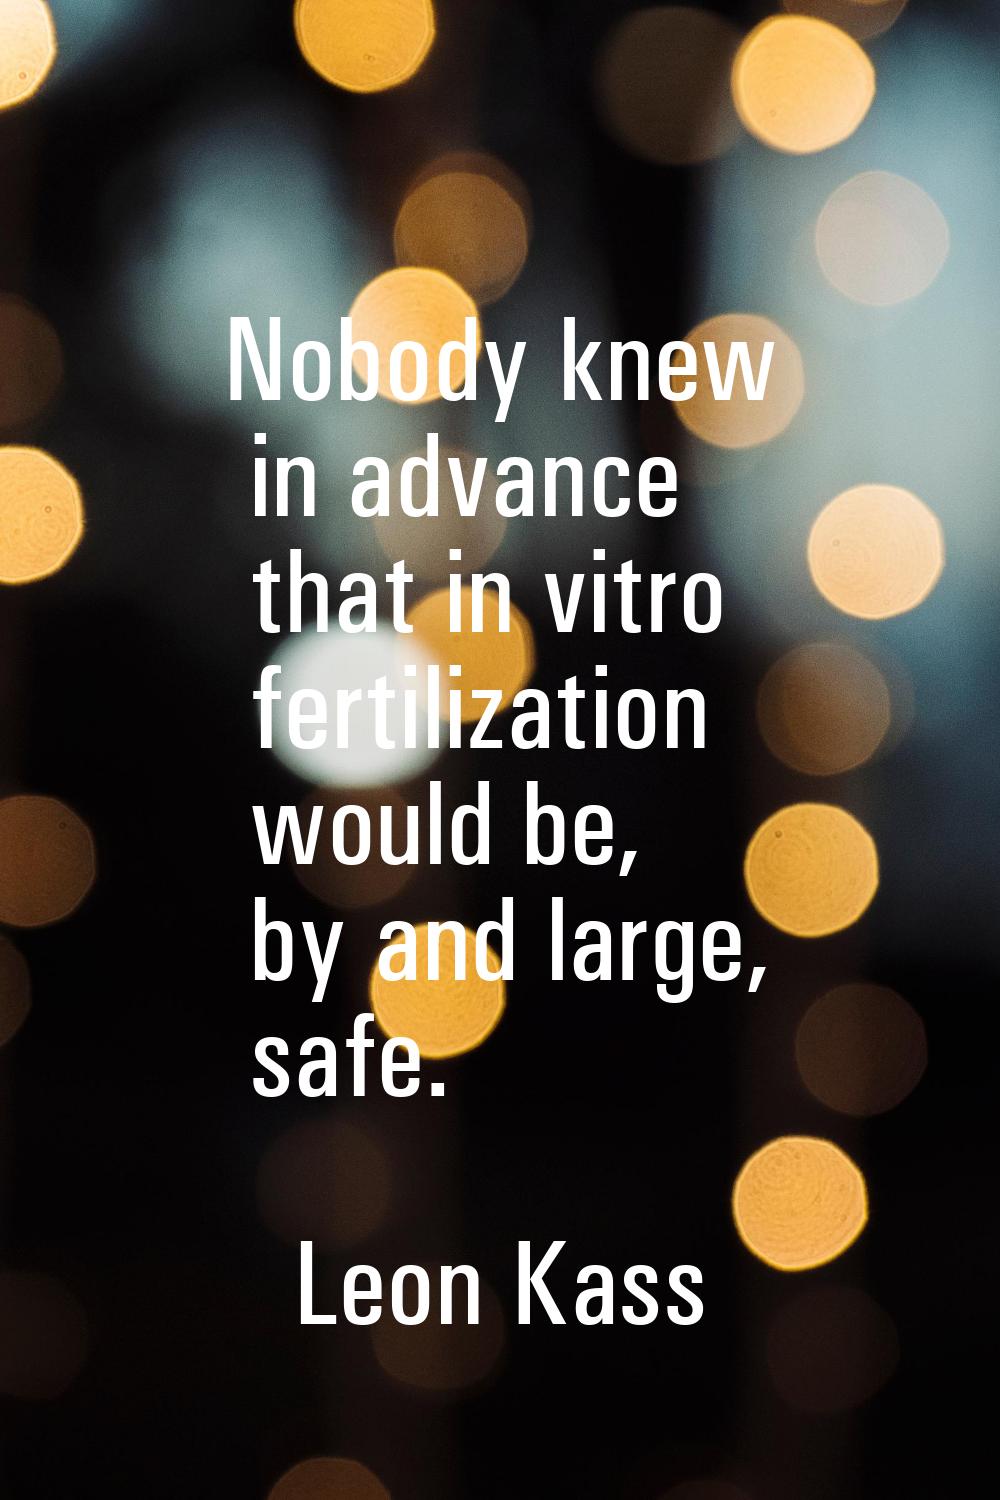 Nobody knew in advance that in vitro fertilization would be, by and large, safe.